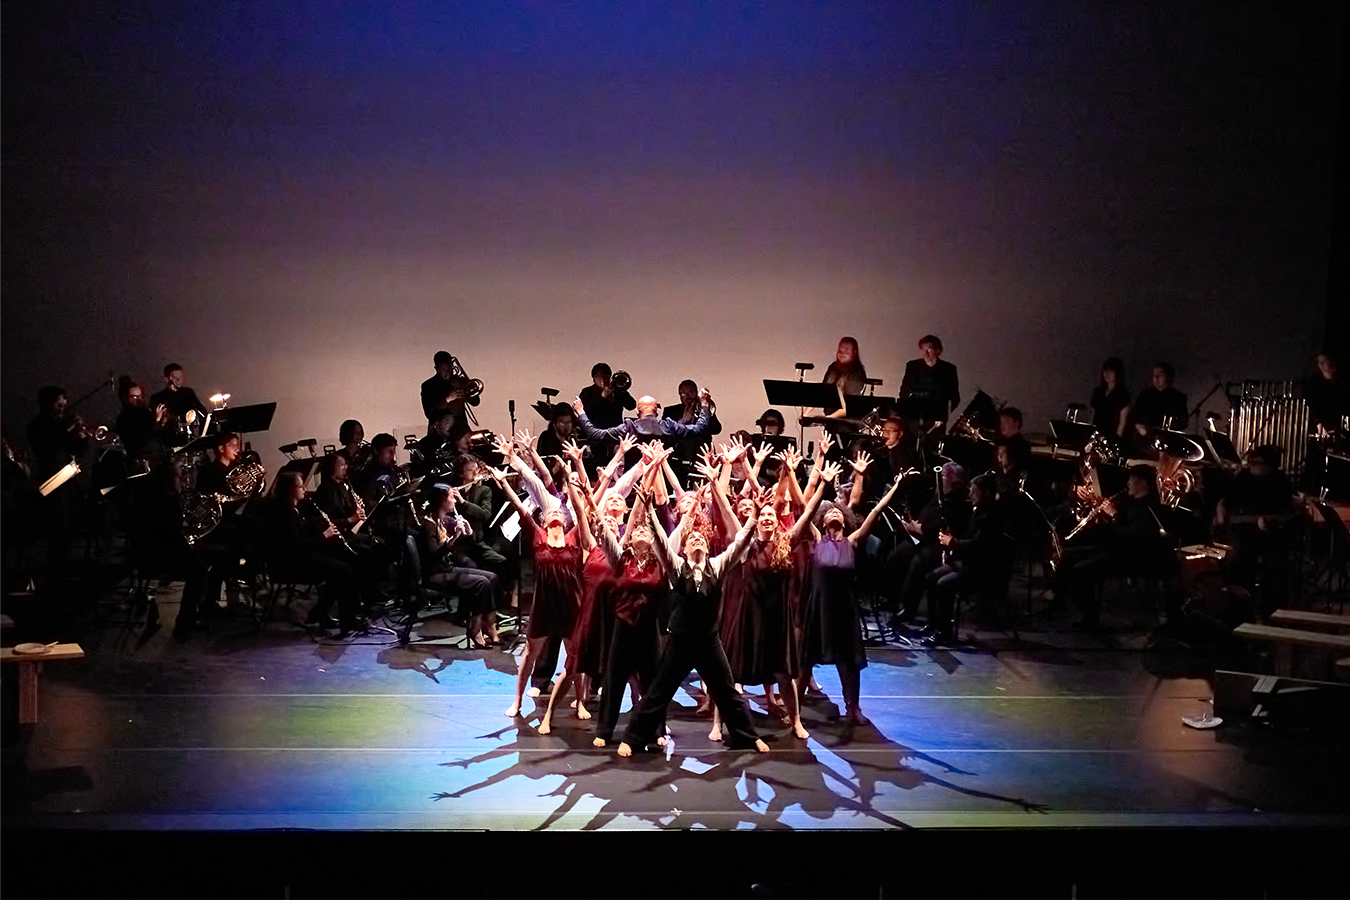 Mason School of Dance students pose center stage during the performance of Omar Thomas's "Come Sunday" with the Mason Wind Symphony on February 28 in the Center for the Arts. Photo by Will Martinez